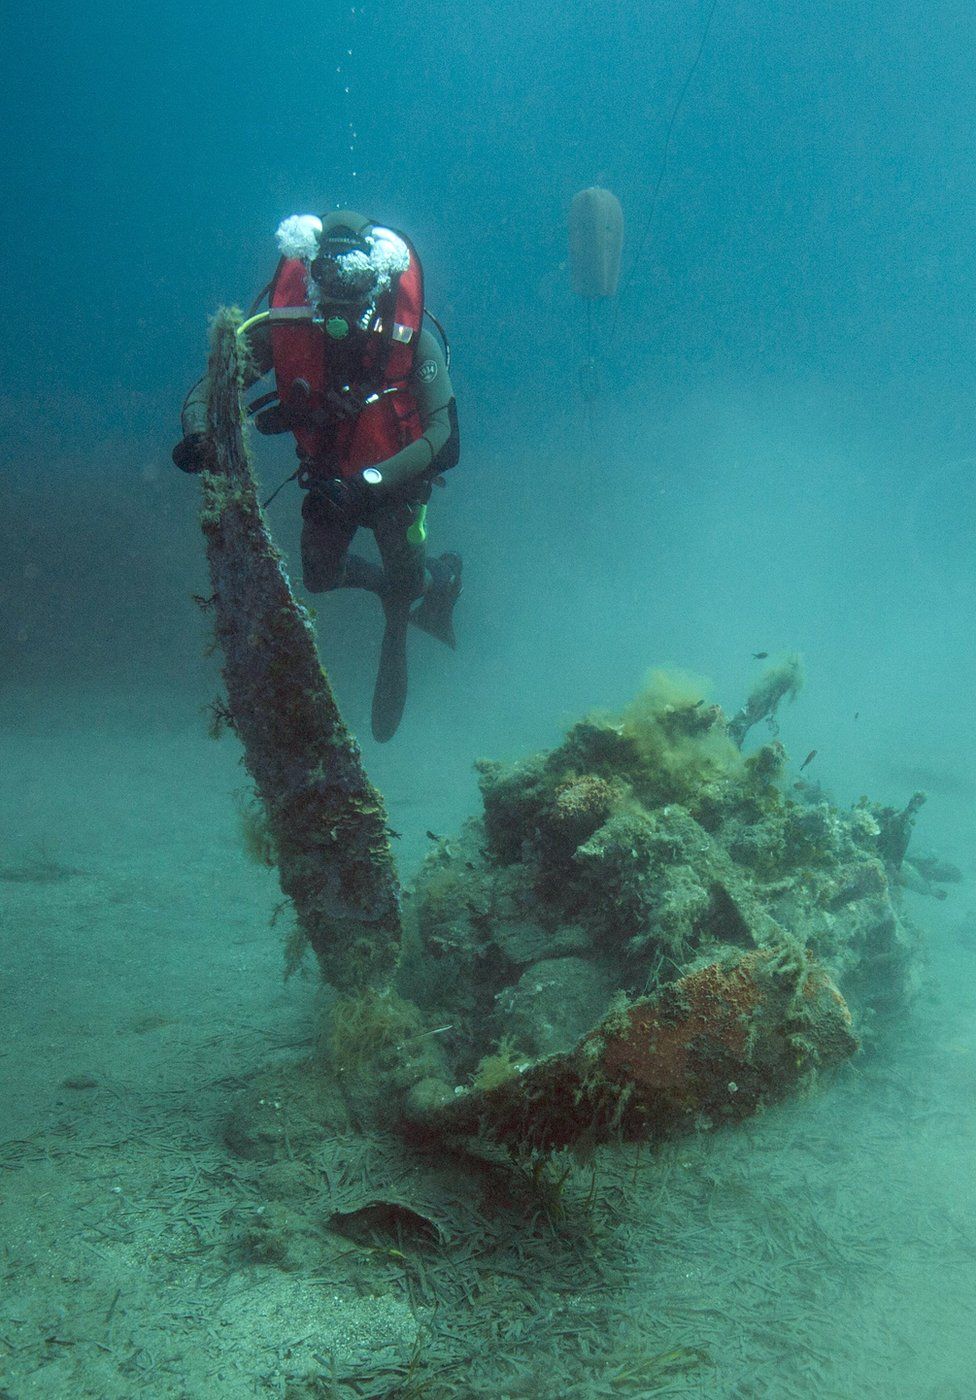 A French military diver member of the FS Pluton M622 navy de-mining ship, swims on July 2, 2018, above the wreck of an USAAF P-47 Thunderbolt (Warthog) US fighter plane